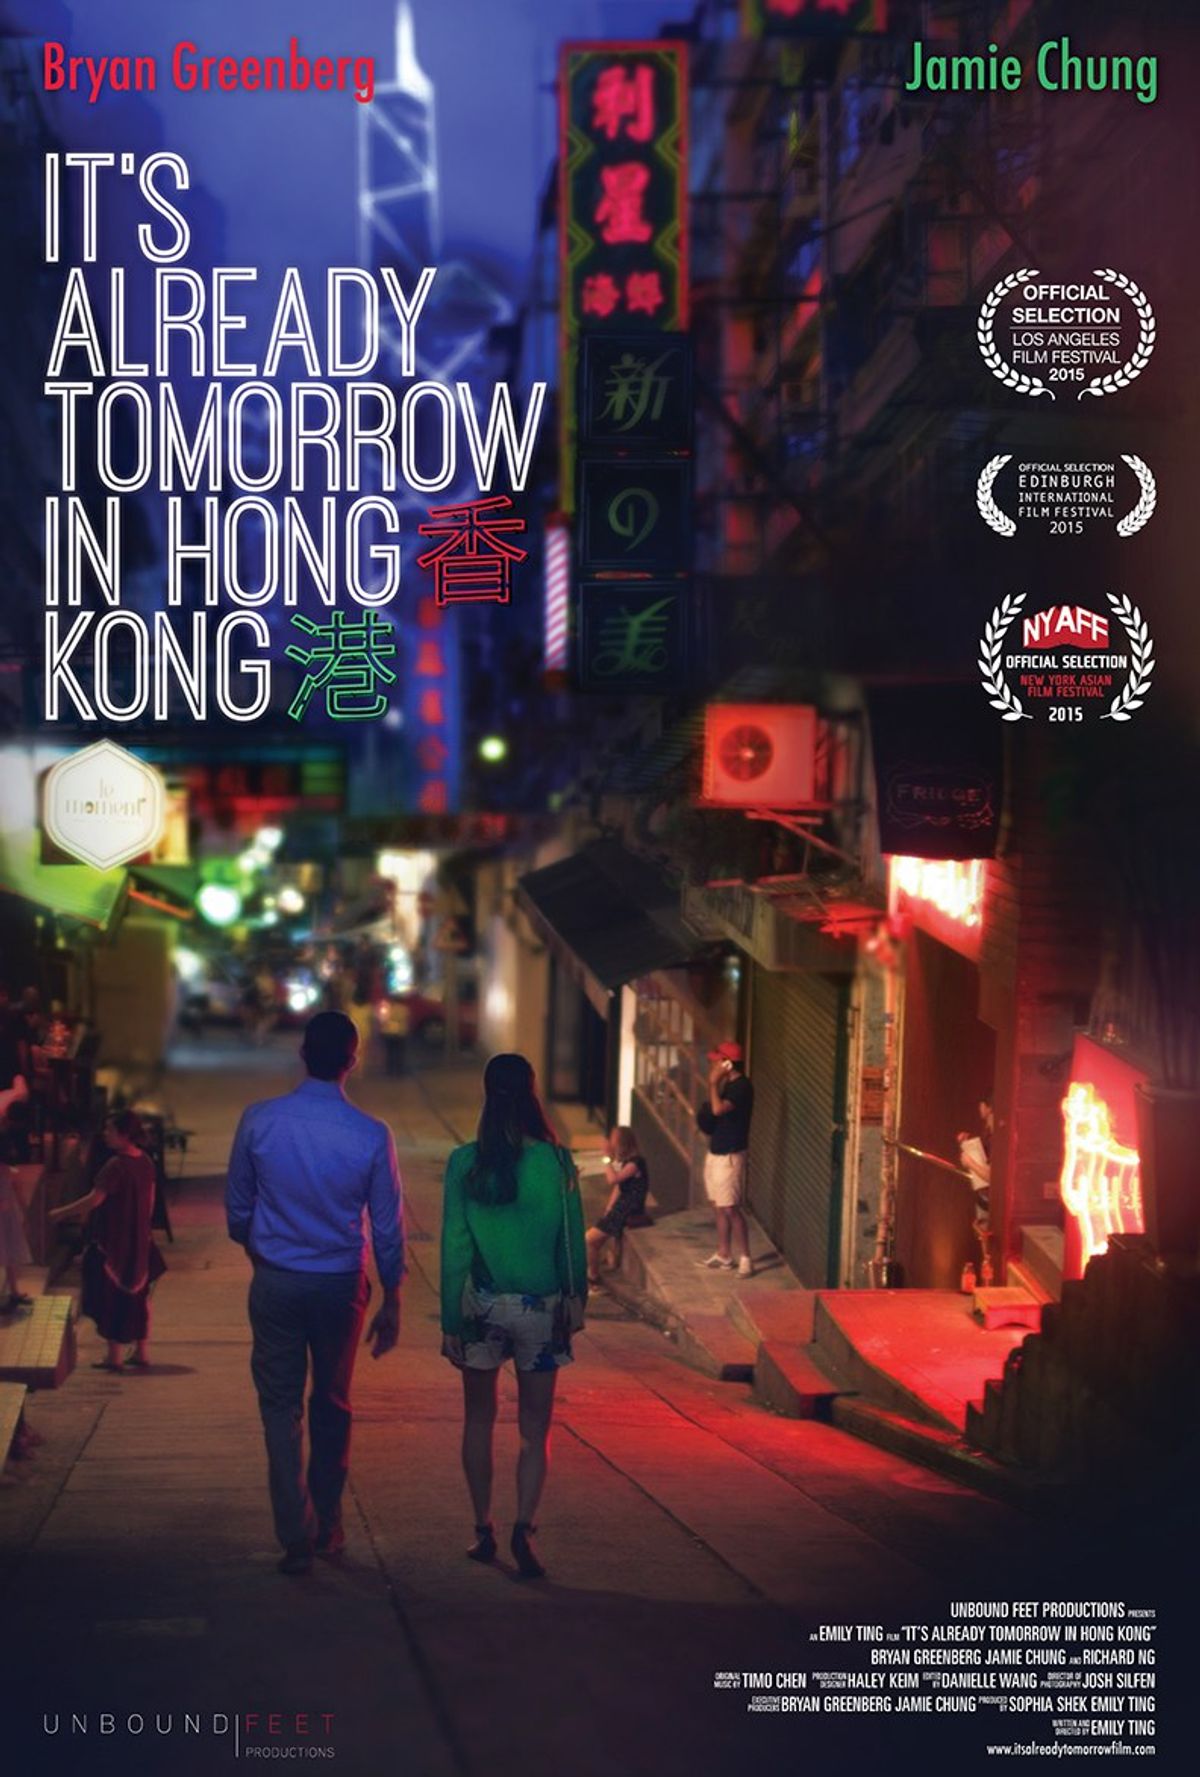 ​What I Learned From “Already Tomorrow In Hong Kong”